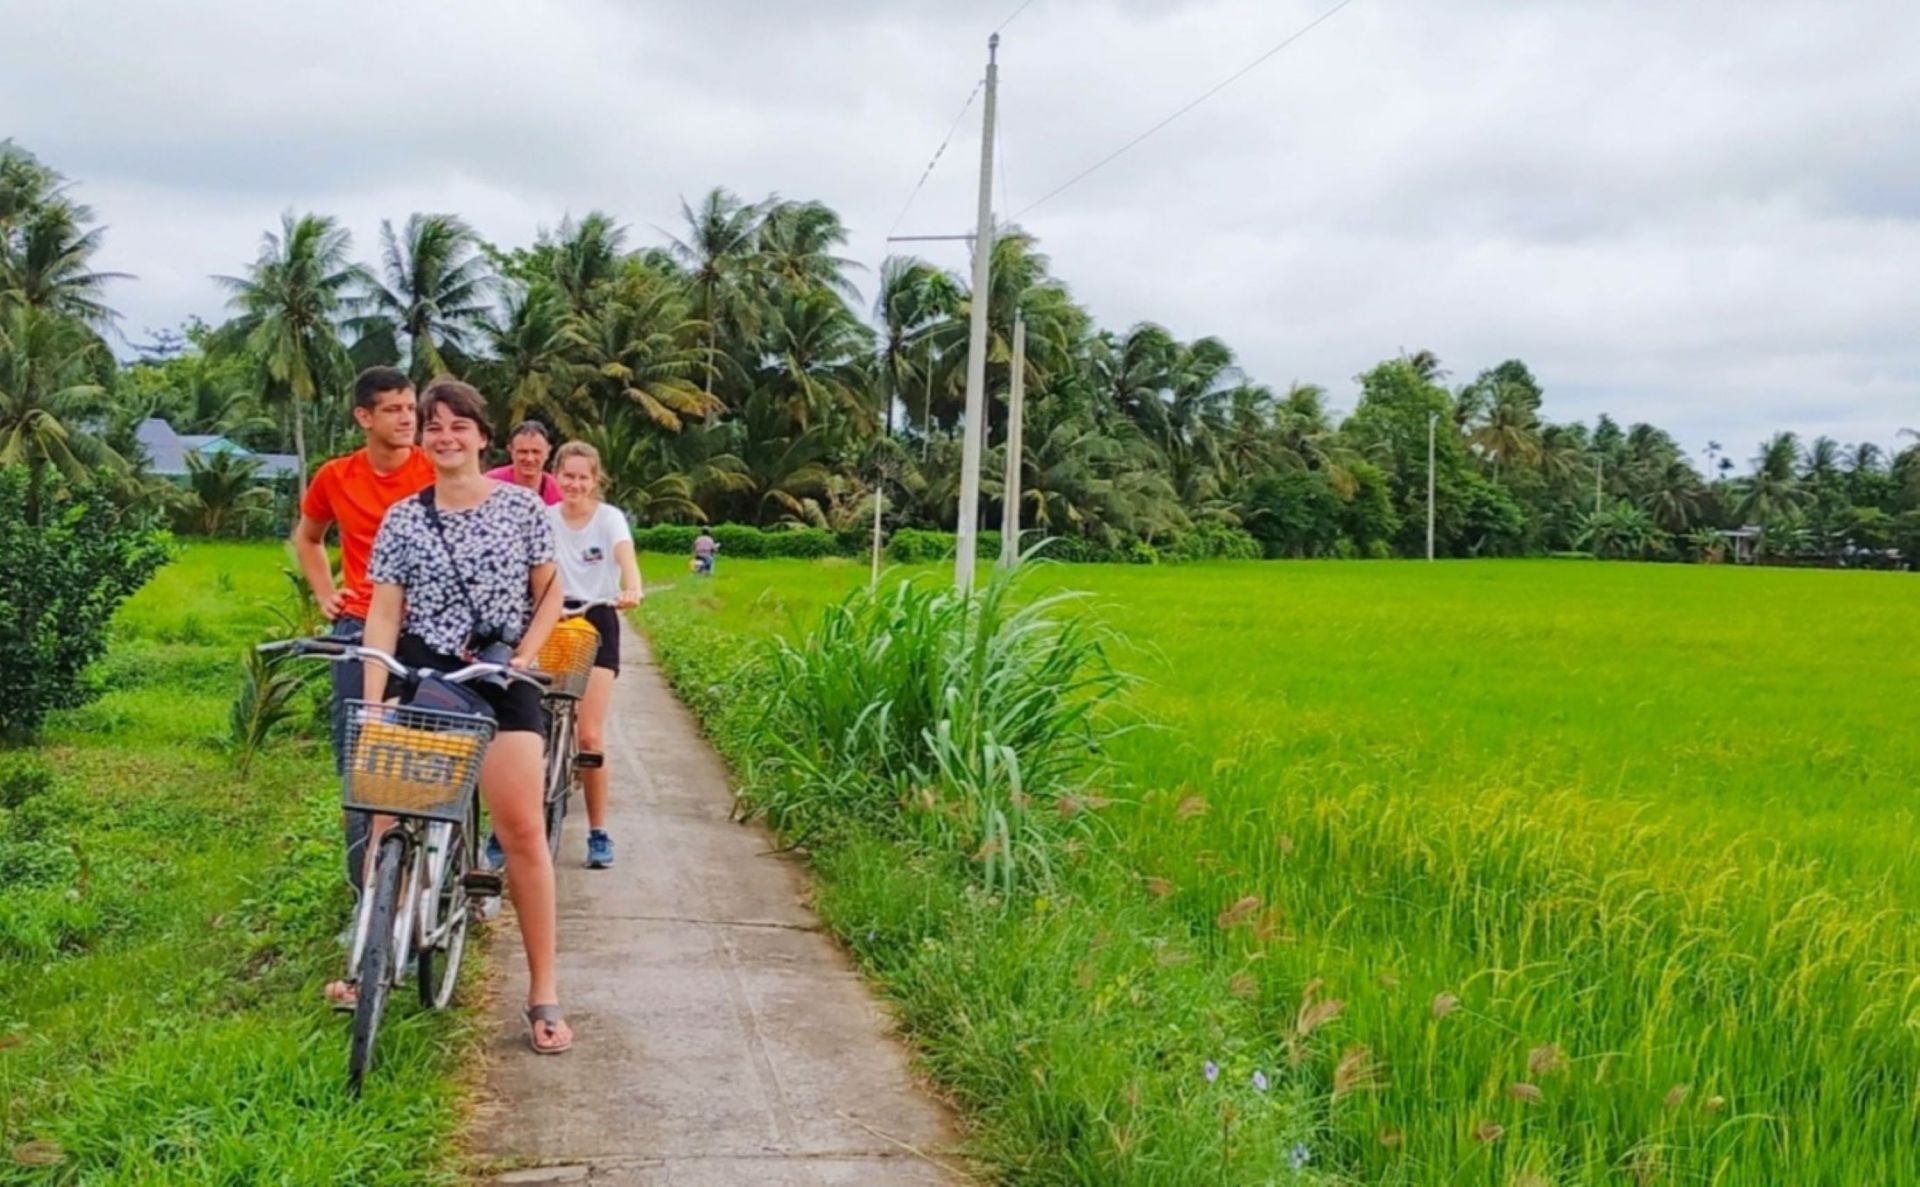 Take your next adventure to a whole new level - hop on a bike and explore the stunning views within Mekong Deltas rice fields - Mekong Delta Vietnam